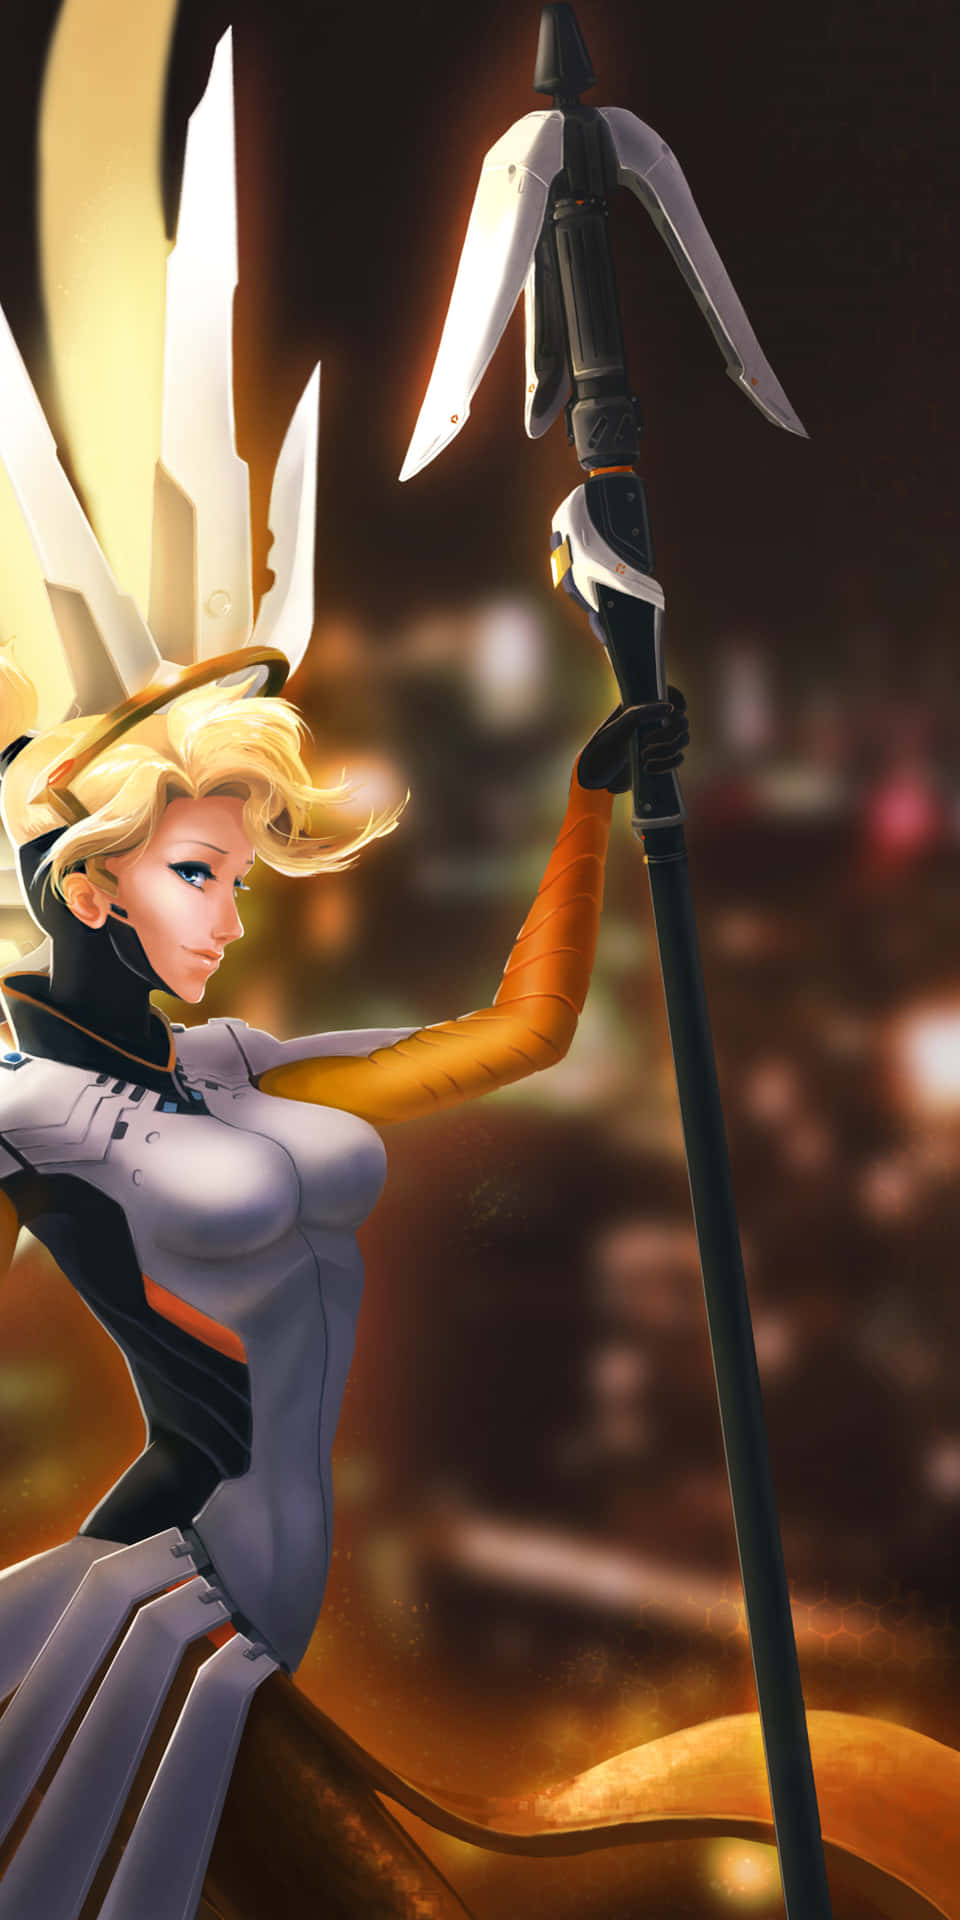 Overwatch's Mercy soaring through the skies Wallpaper